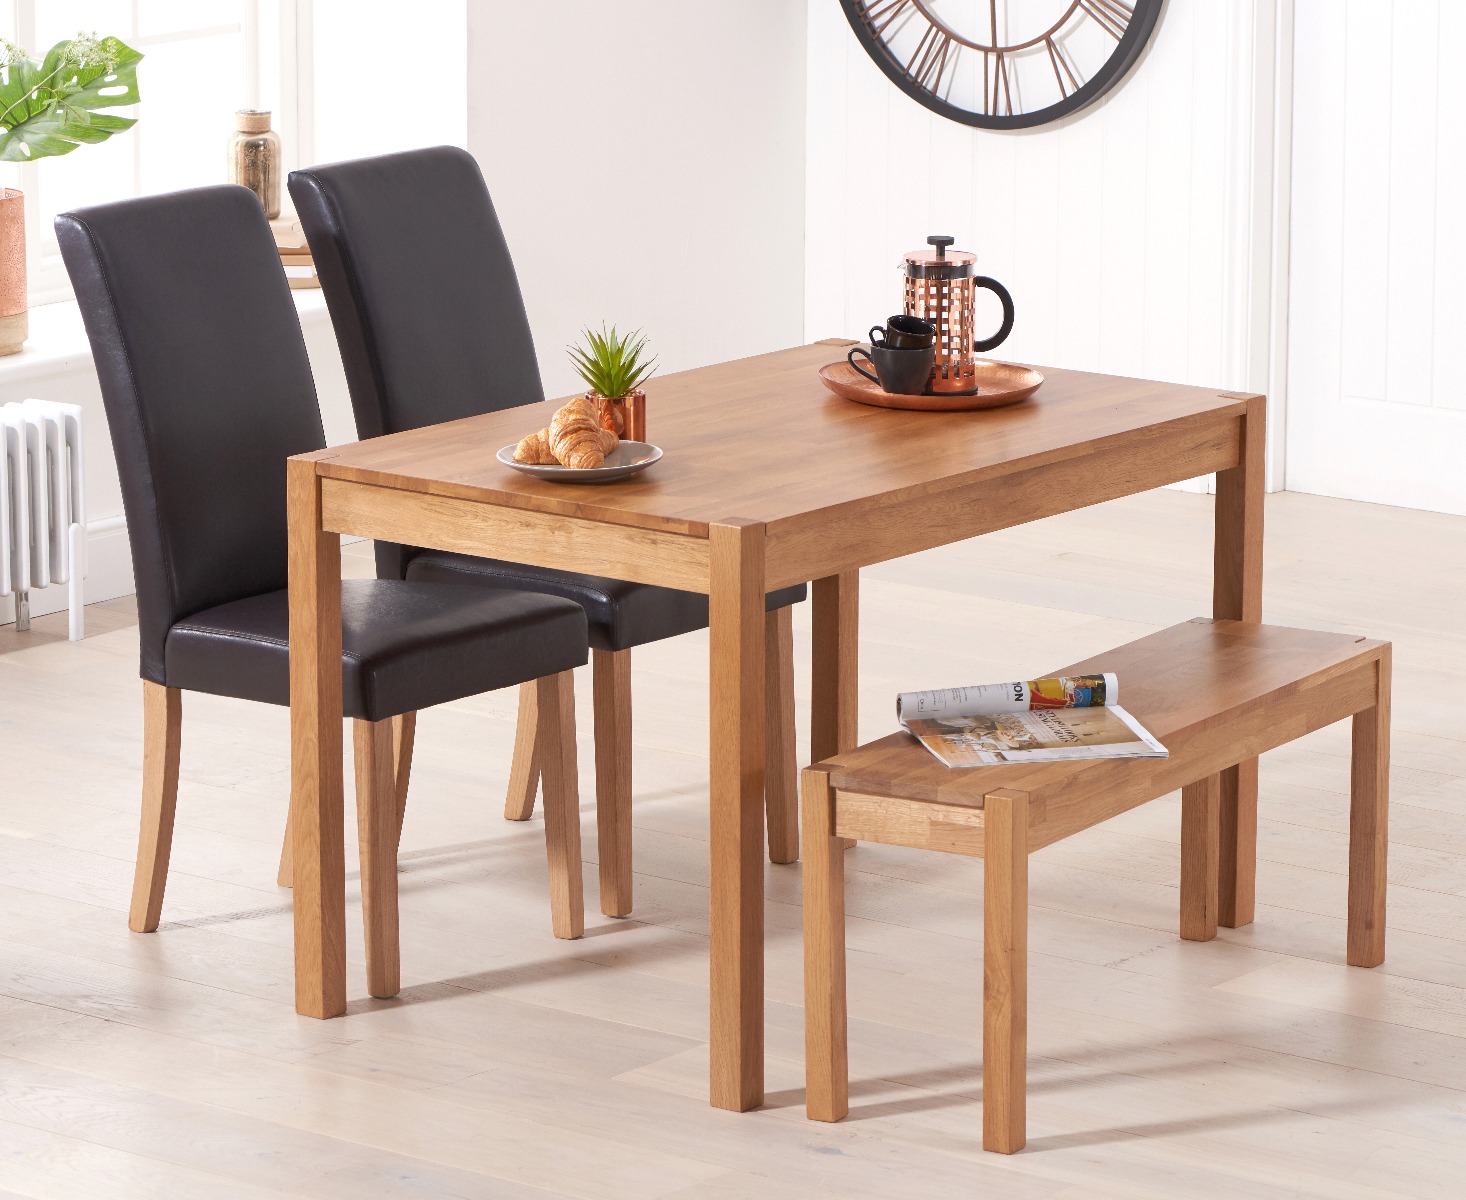 Photo 1 of York 120cm solid oak dining table with 4 brown olivia chairs with 1 oak bench